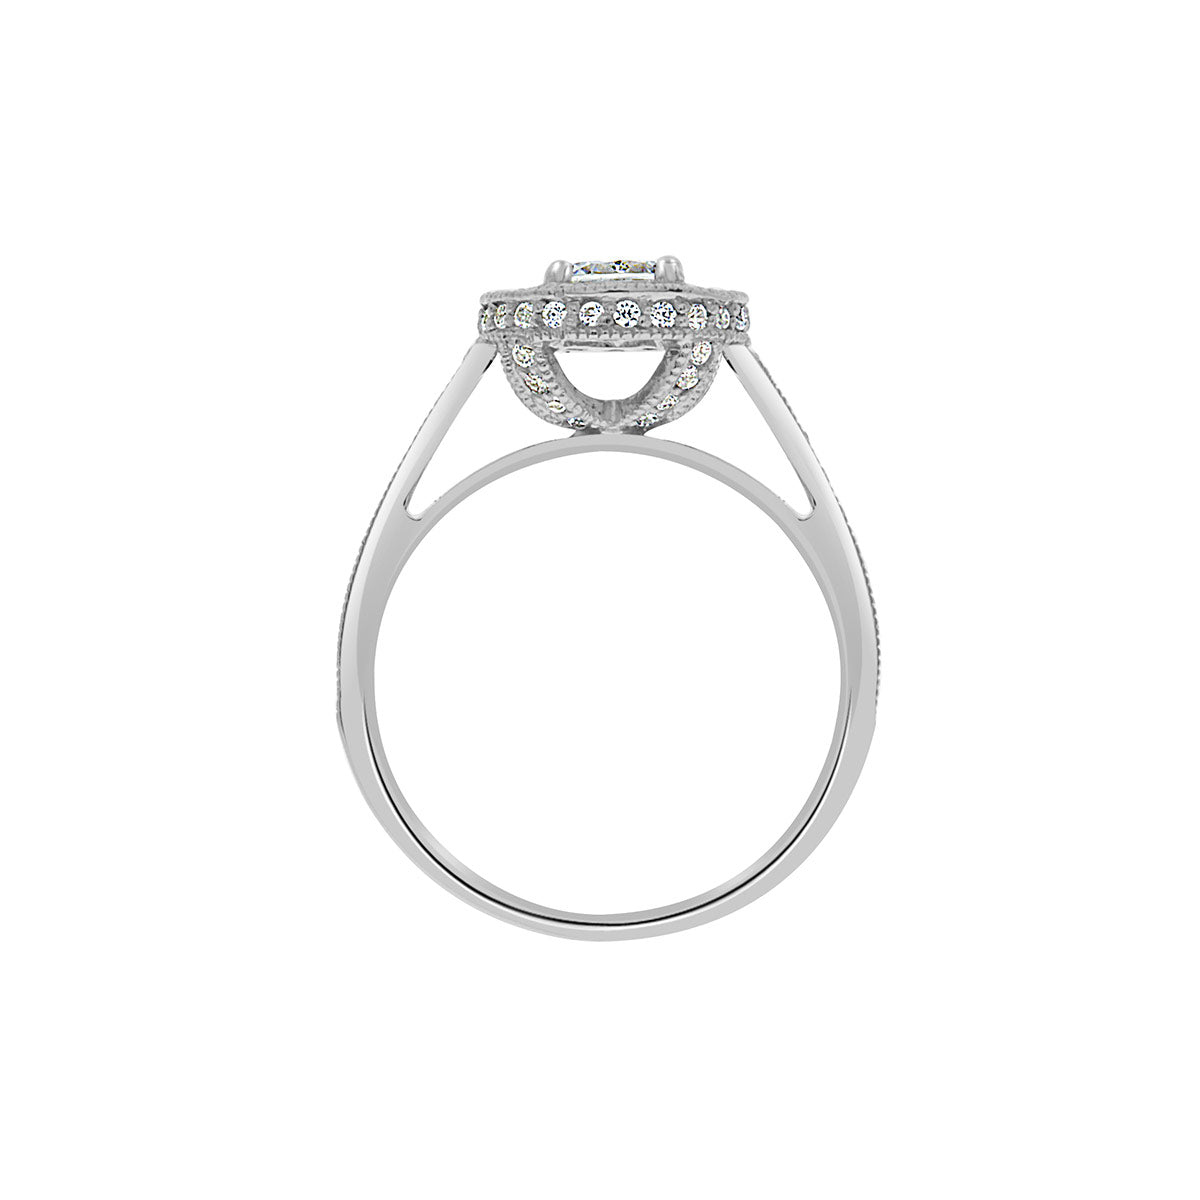 Vintage Style Ring in White Gold standing verticle